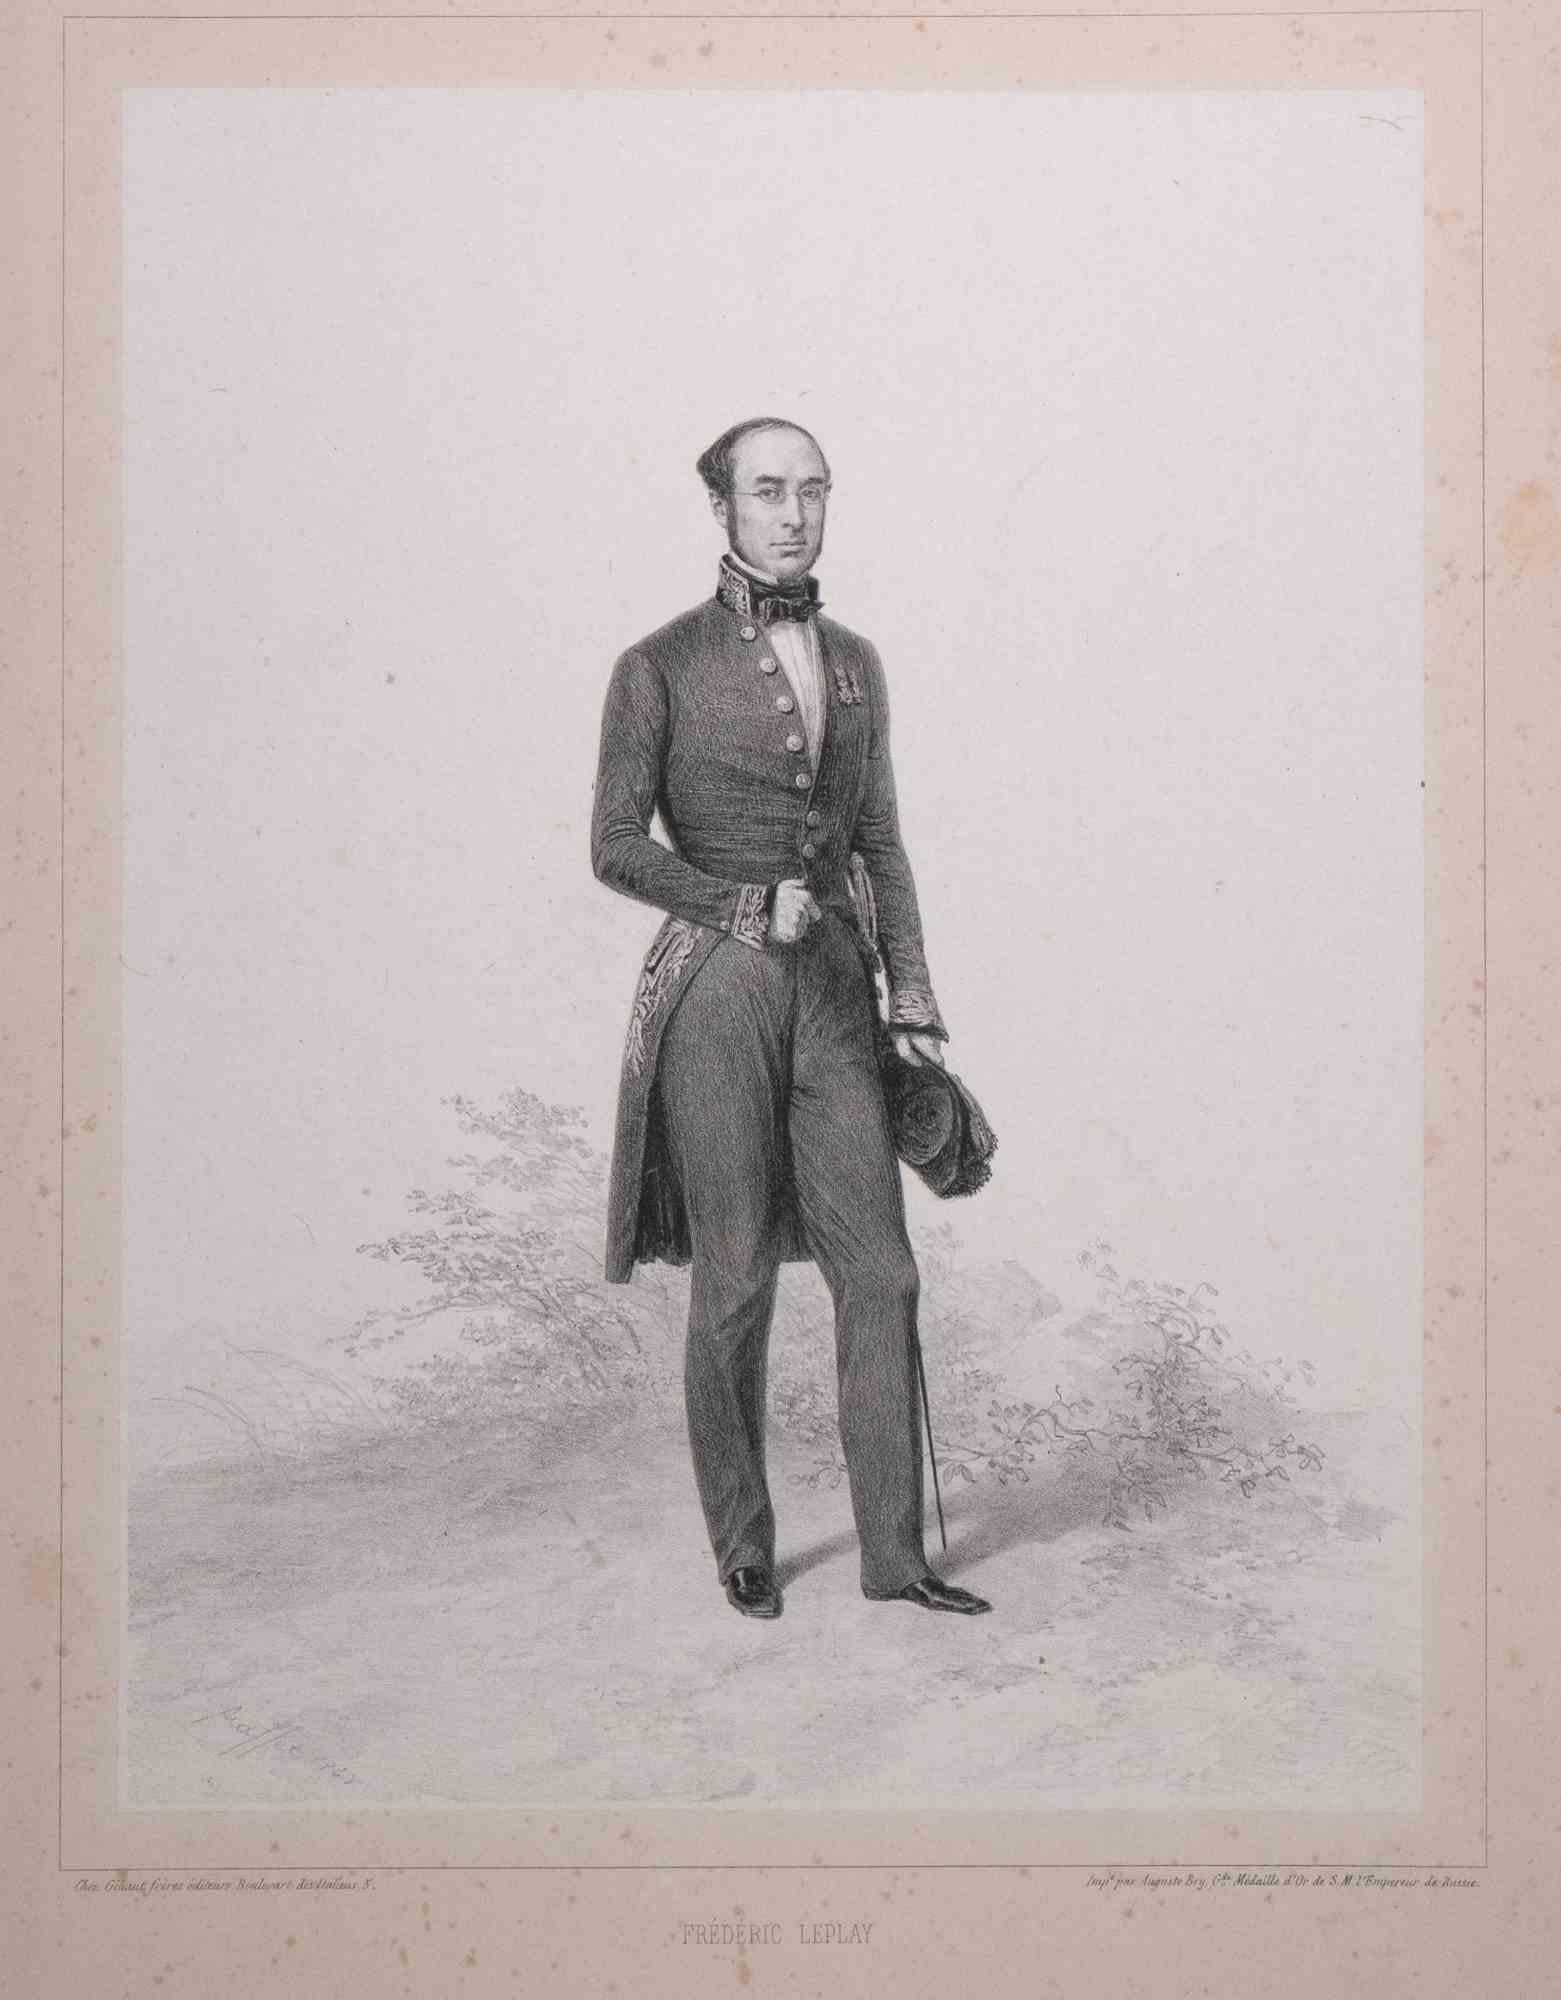 Frederic Lepla - Original Lithography by Denis Auguste Marie Raffet - 1848